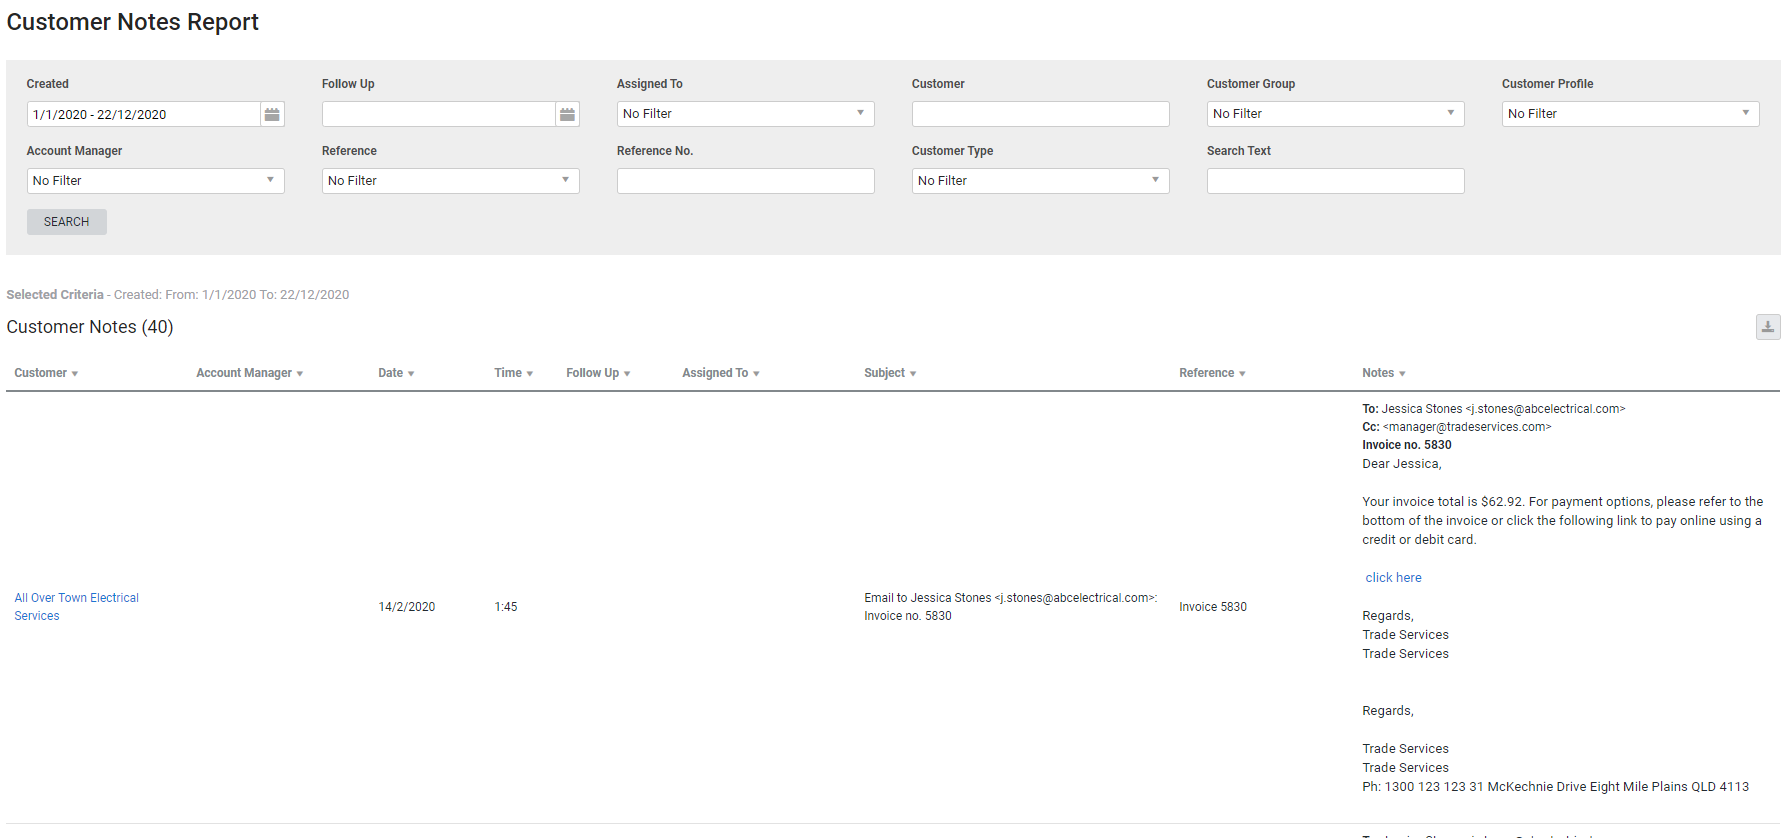 A screenshot of the Customer Notes report.